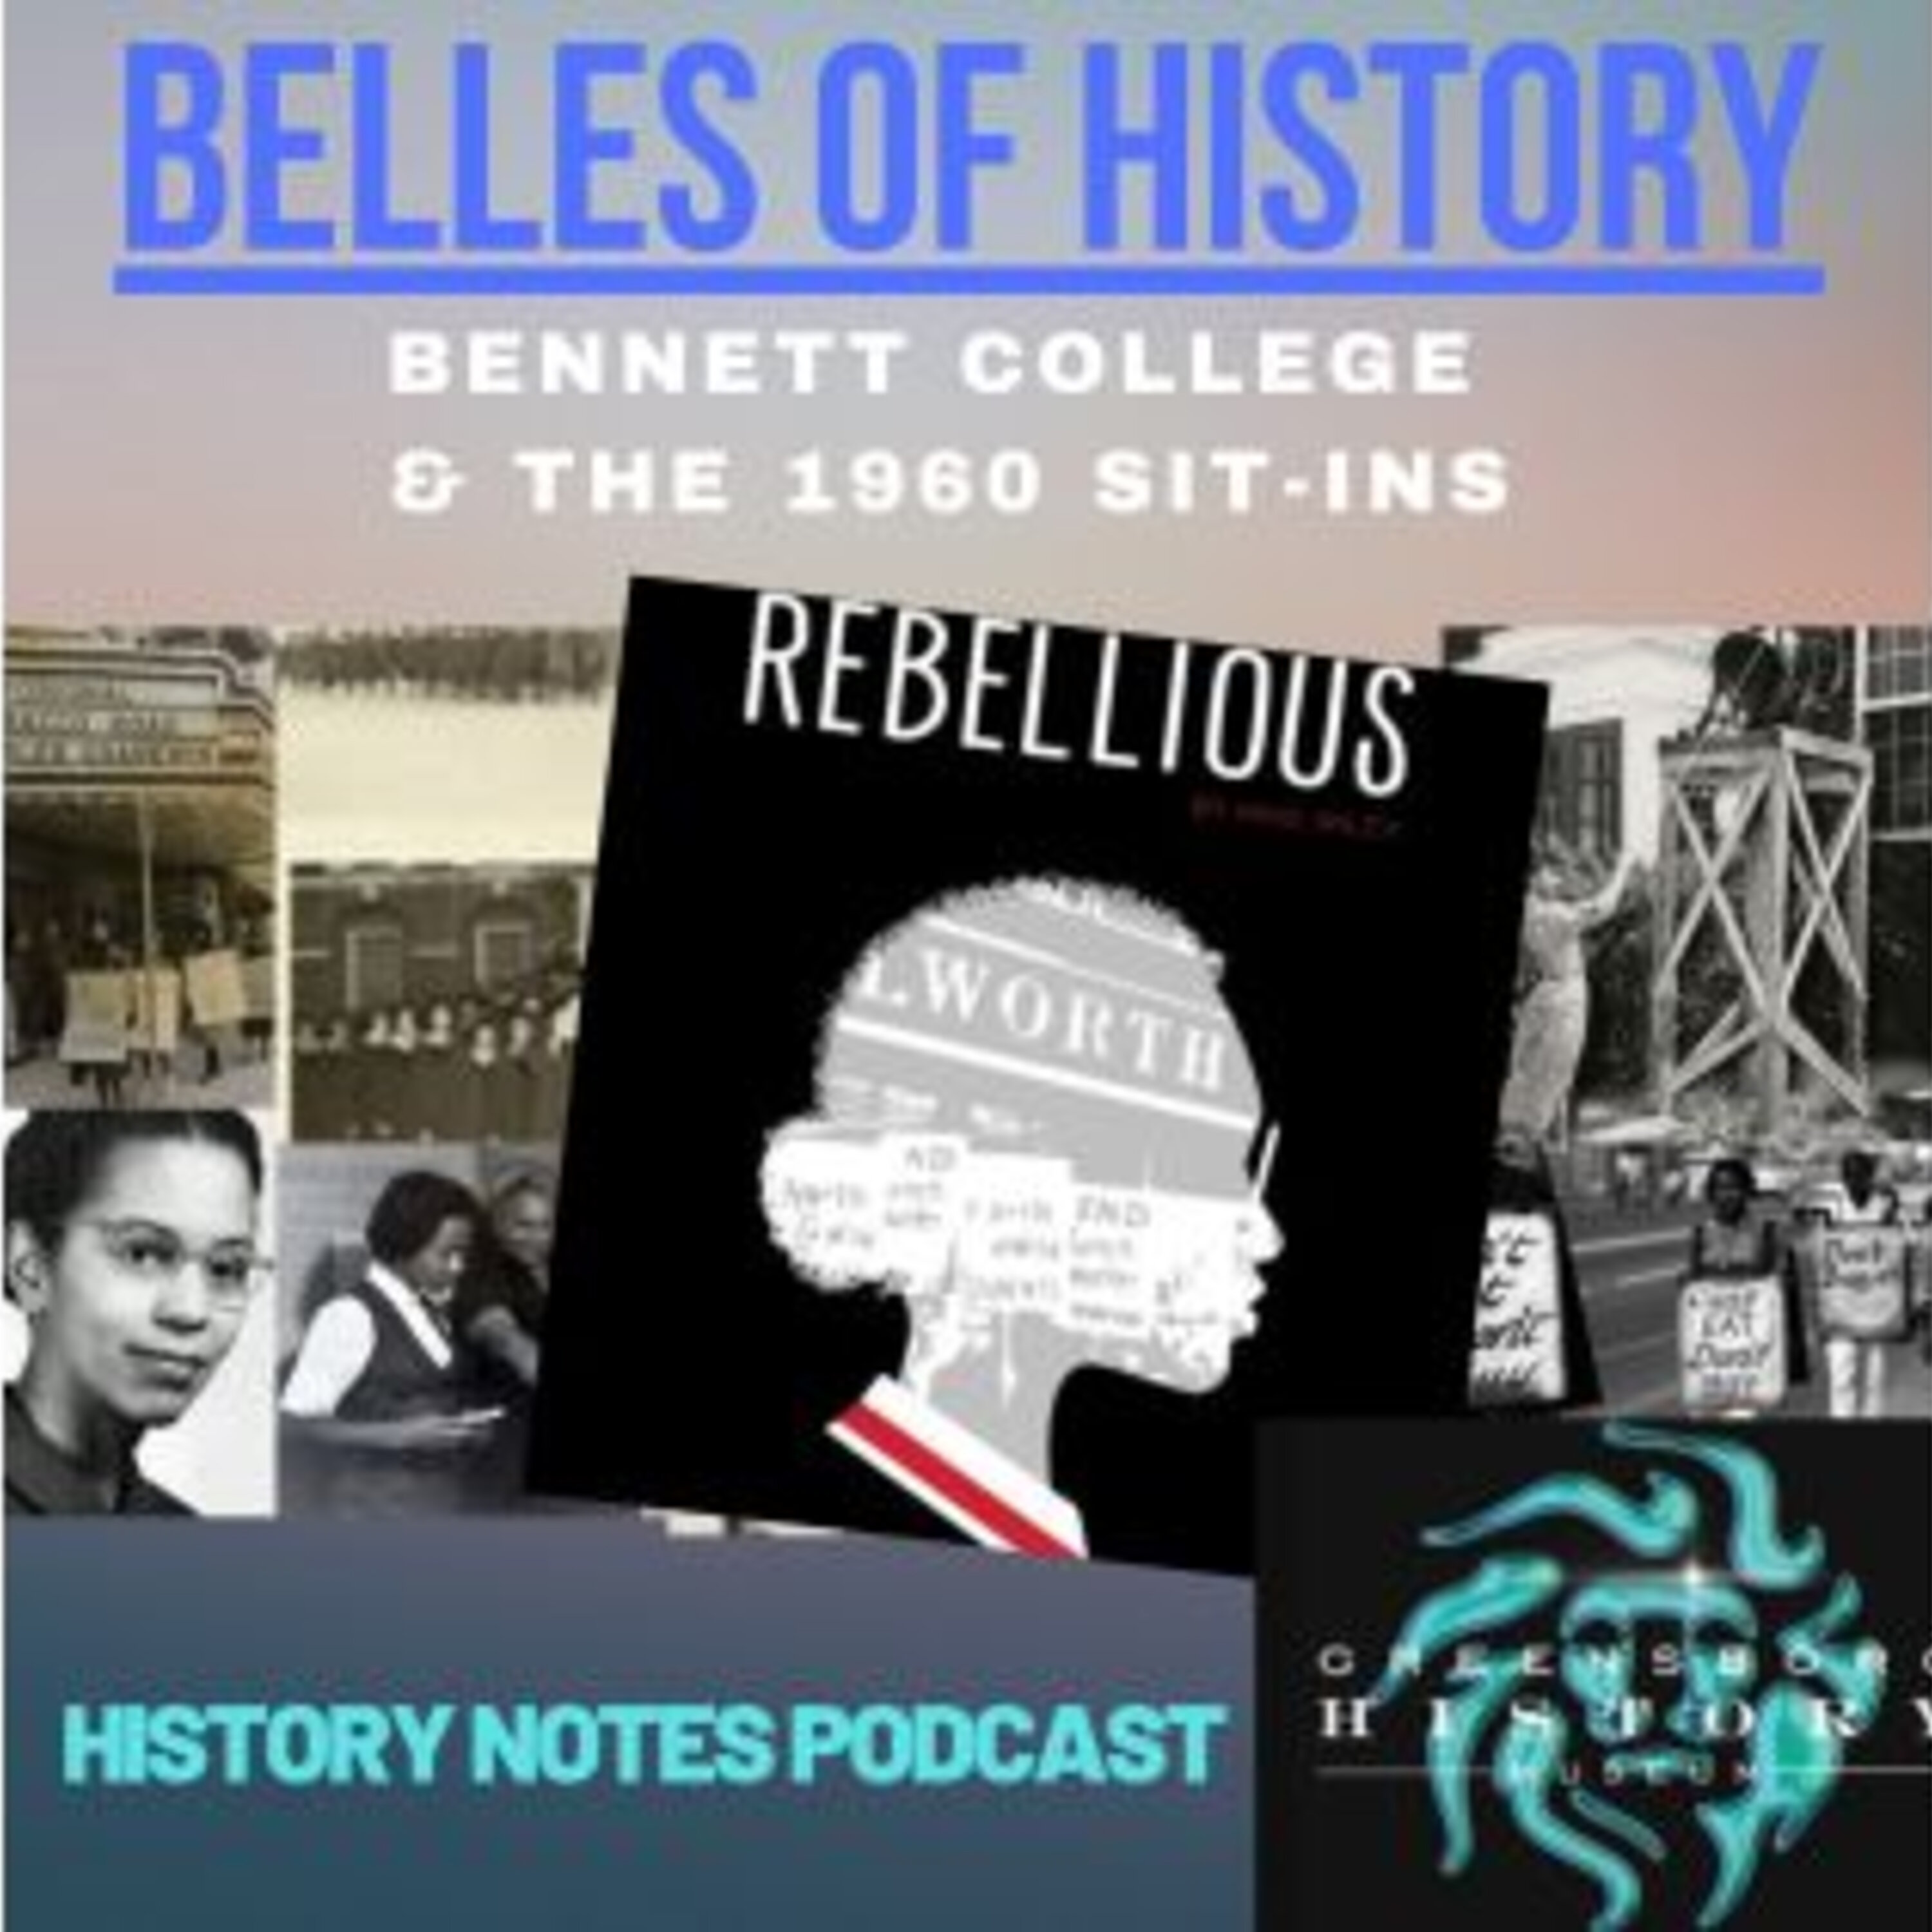 History Notes - Belles of History: Bennett College & the 1960 Sit-Ins Image